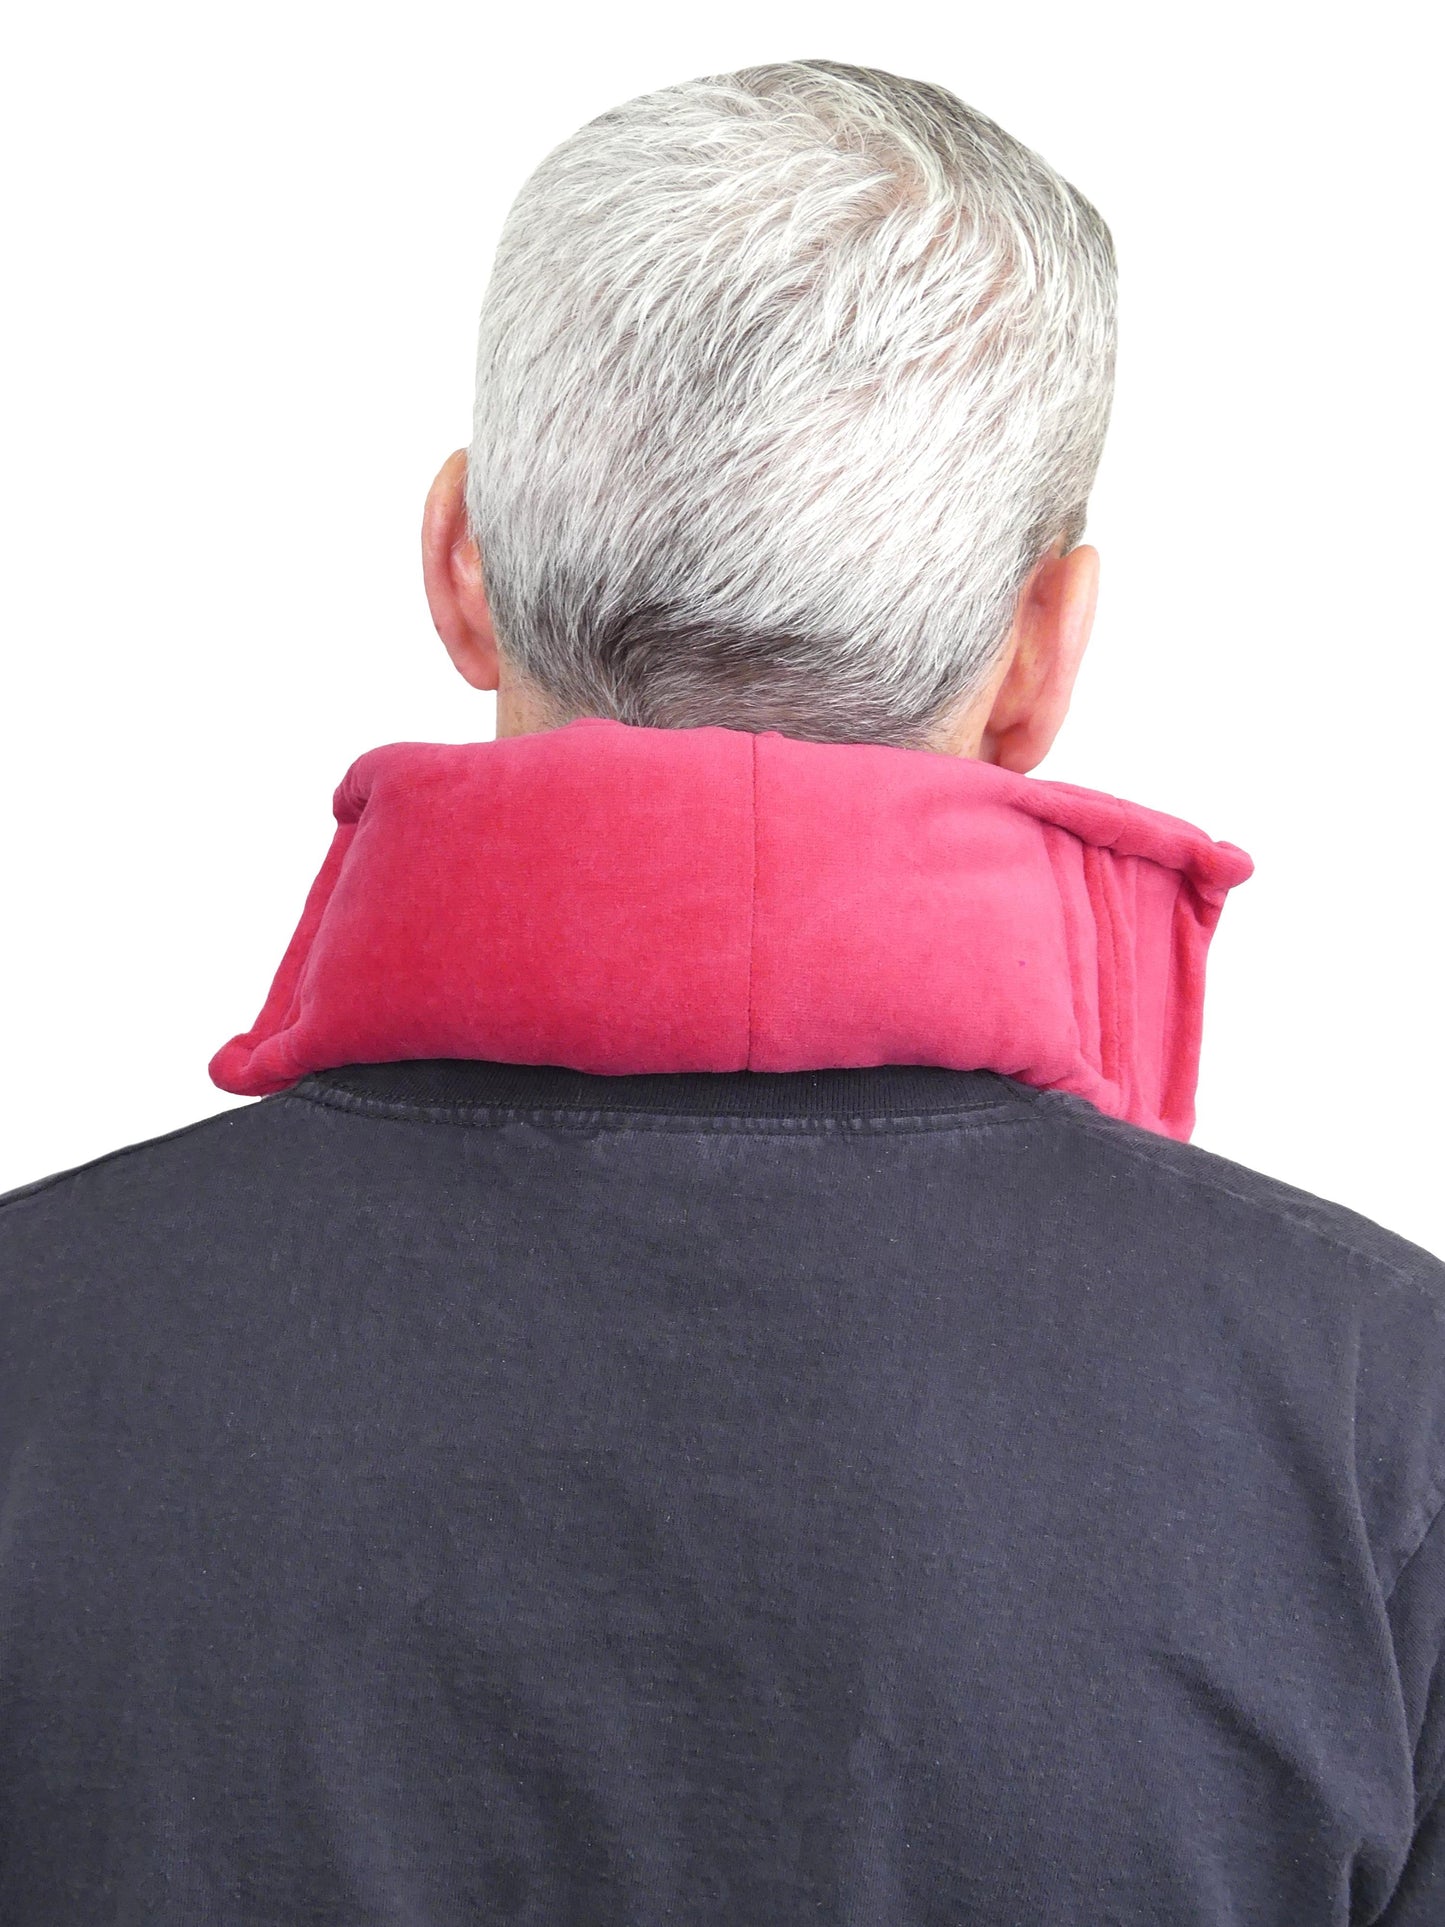 Prositioning and Pressure Care: Chin Support Cushion - M199 - MEDORIS